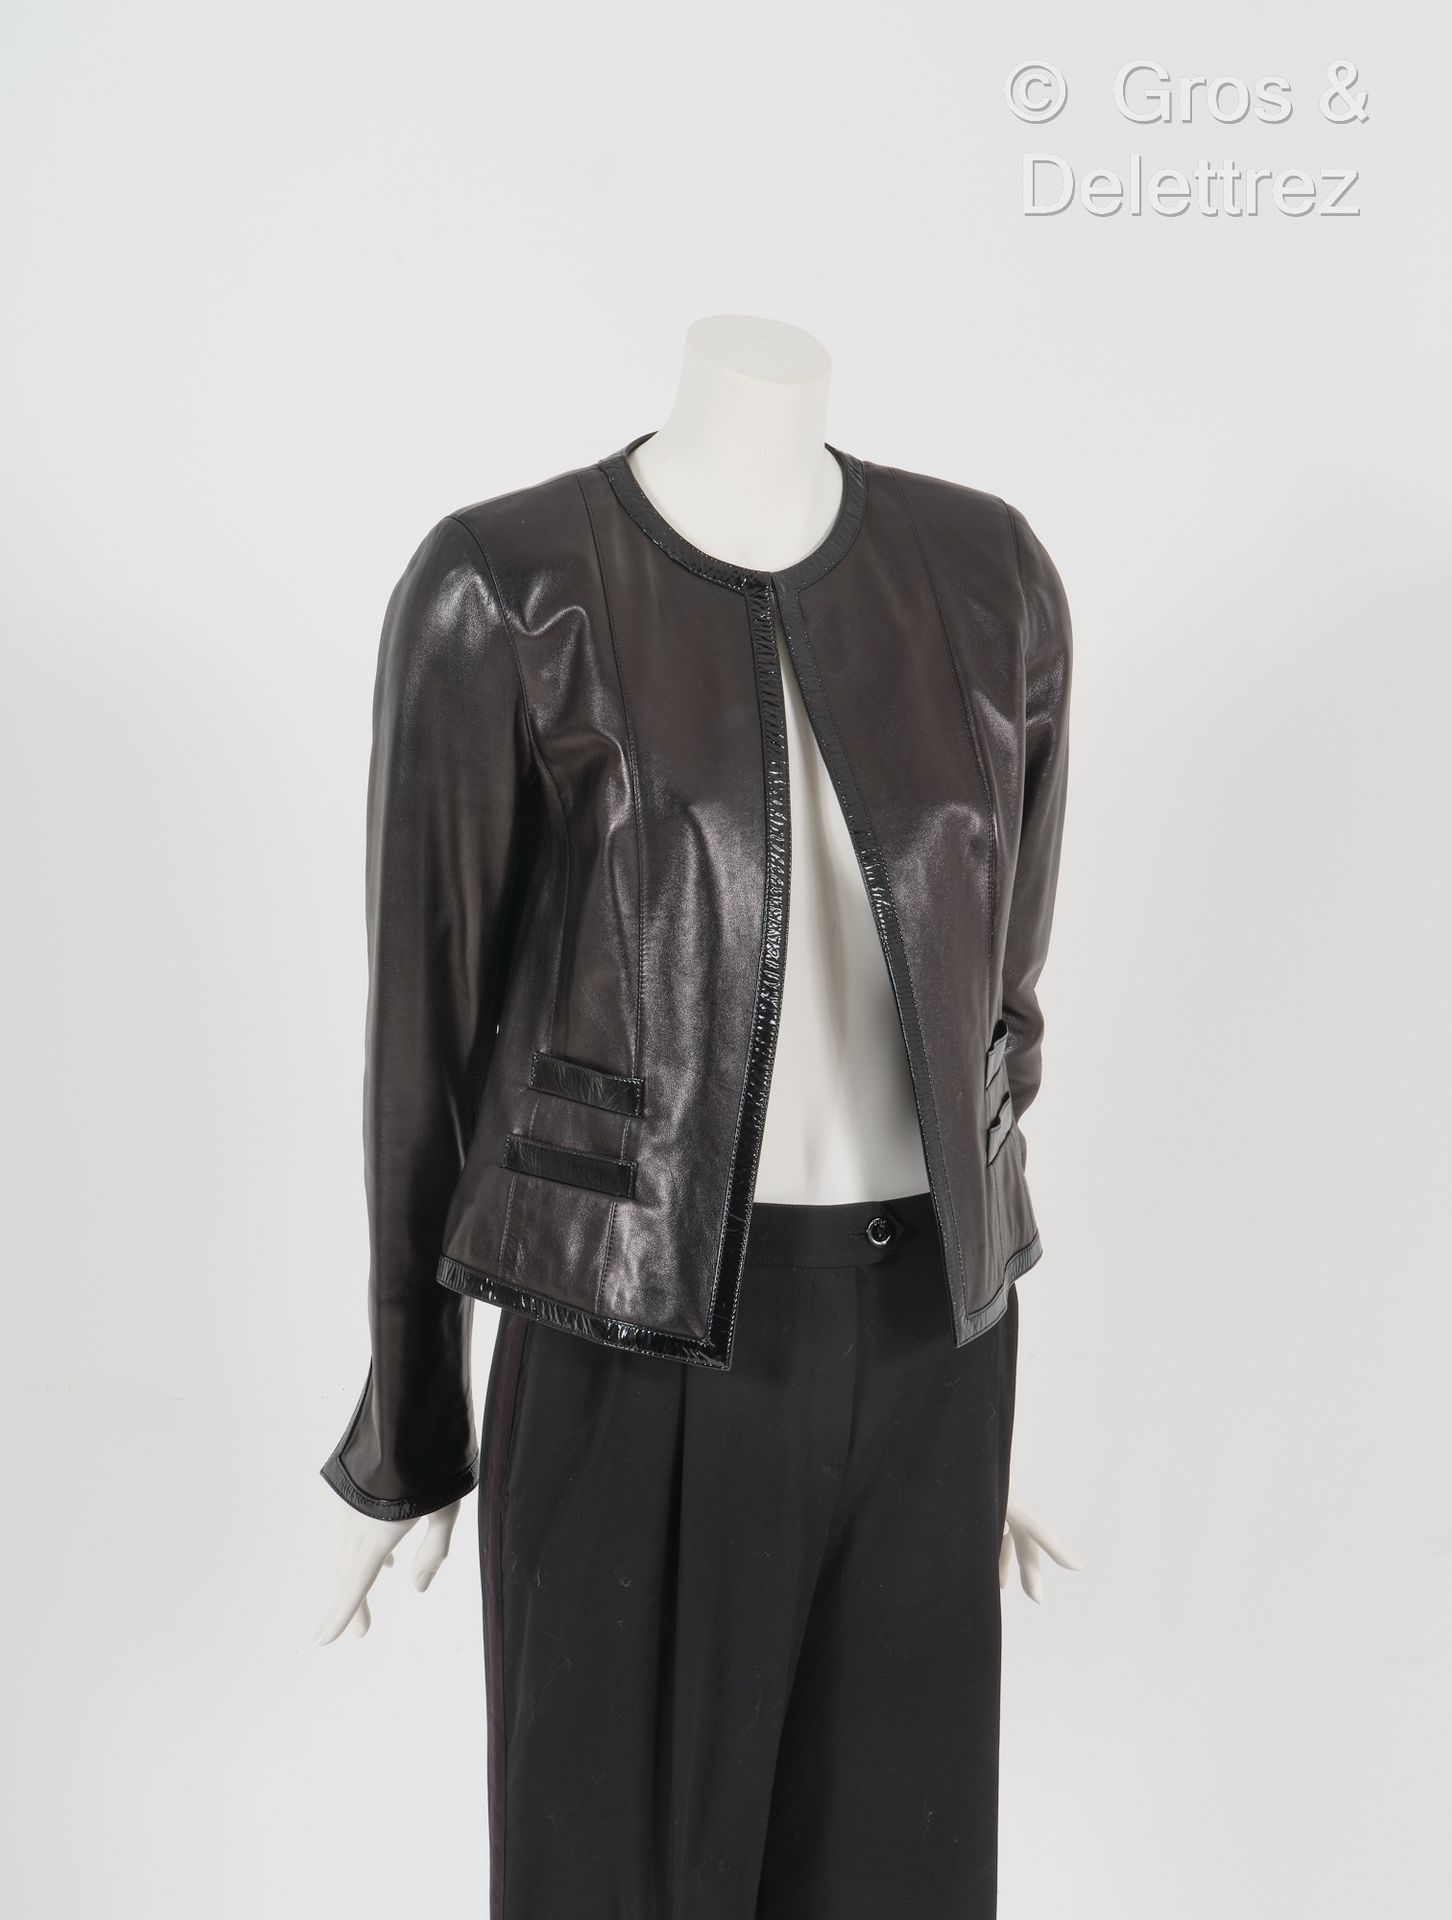 APOSTROPHE Black lambskin leather jacket trimmed with patent leather in the colo&hellip;